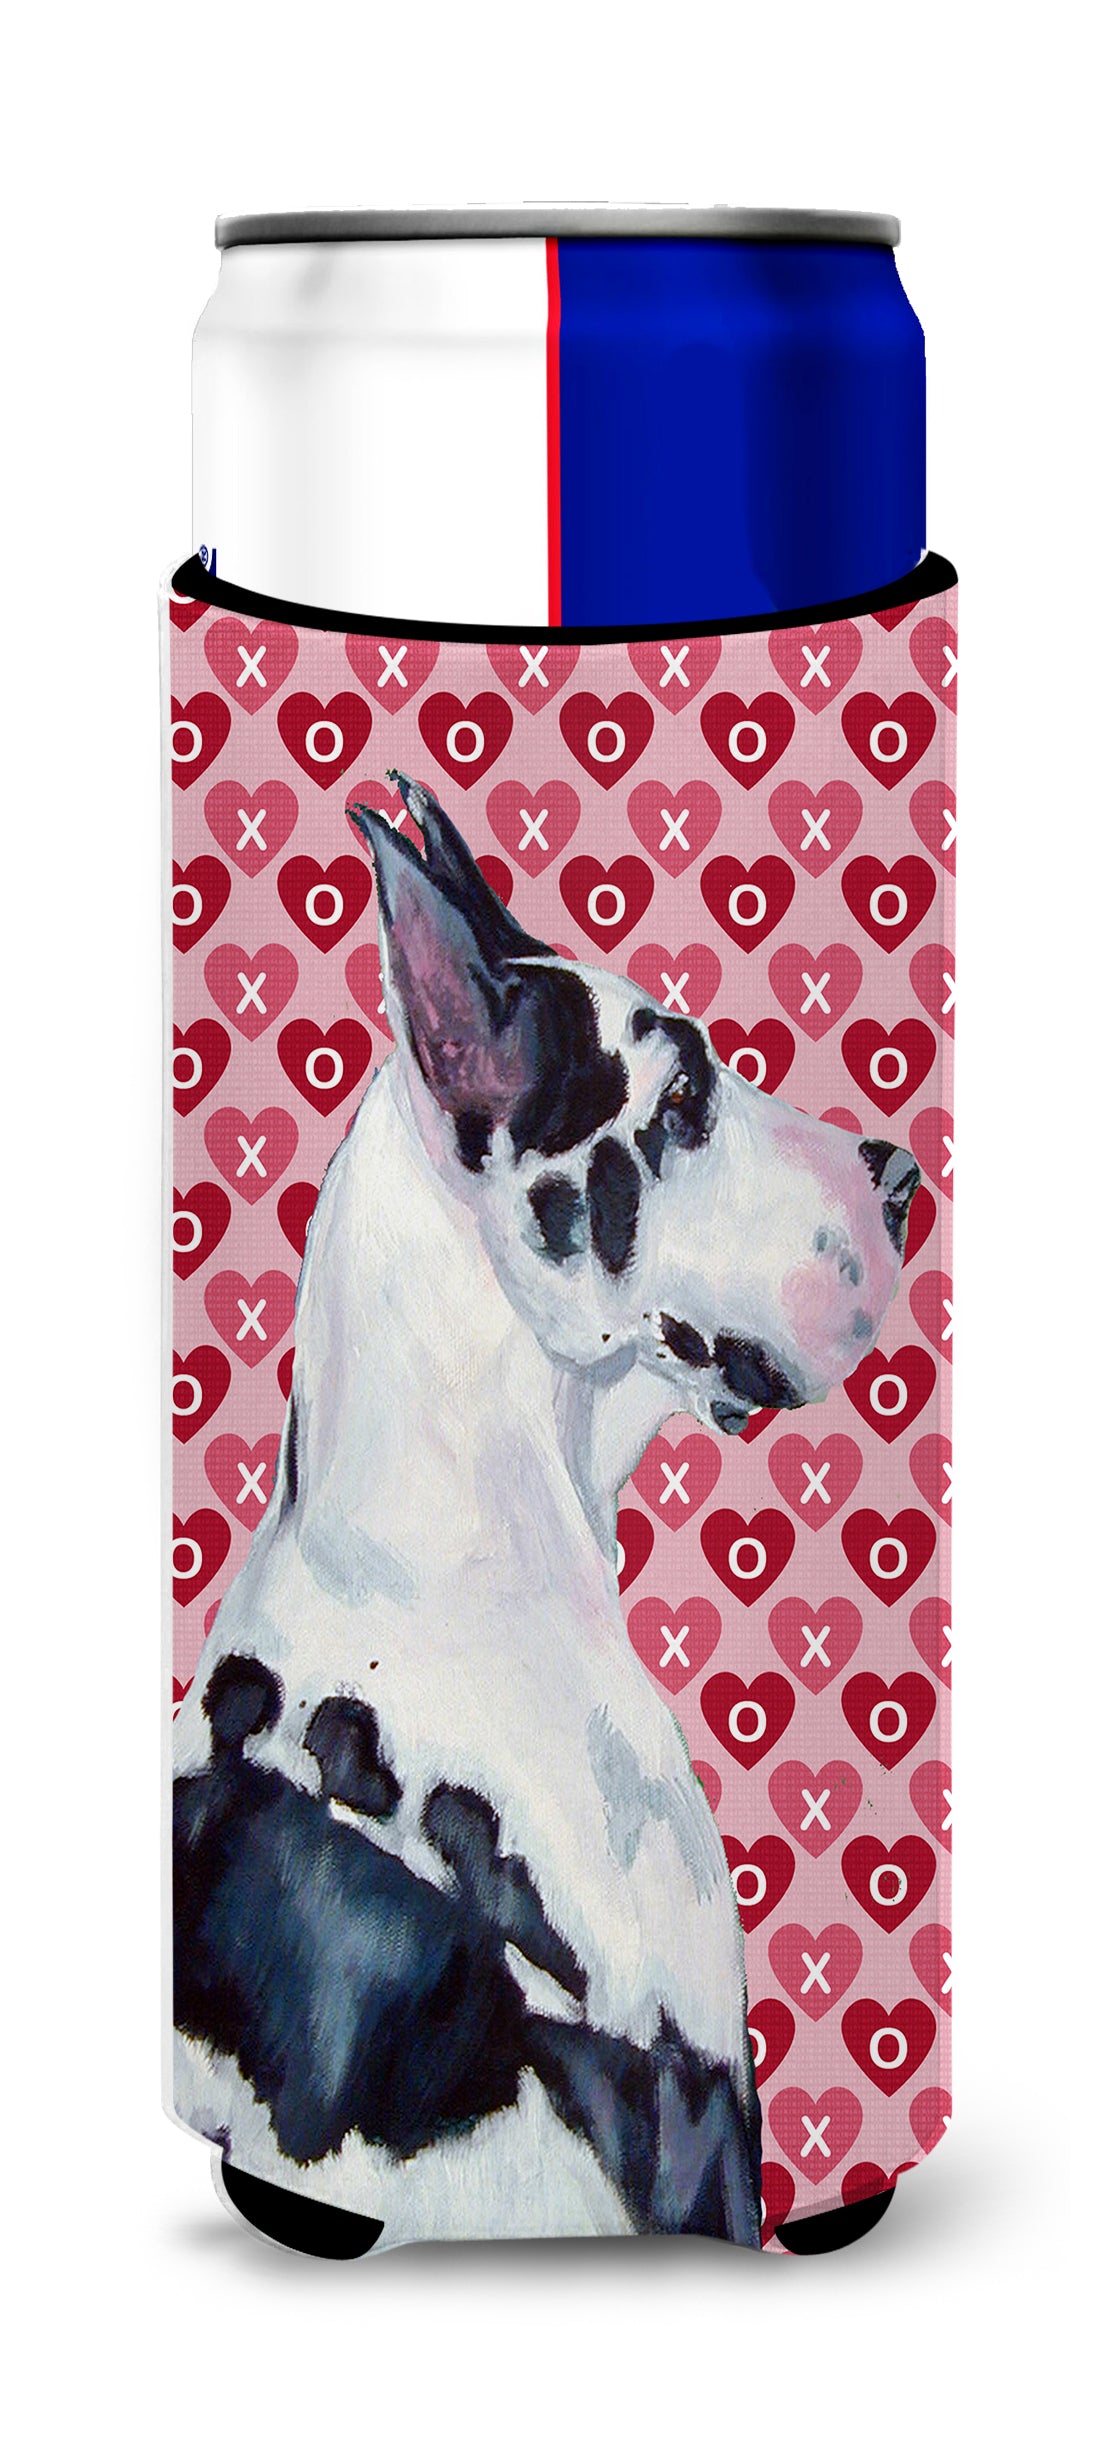 Great Dane Hearts Love and Valentine's Day Portrait Ultra Beverage Insulators for slim cans LH9146MUK.